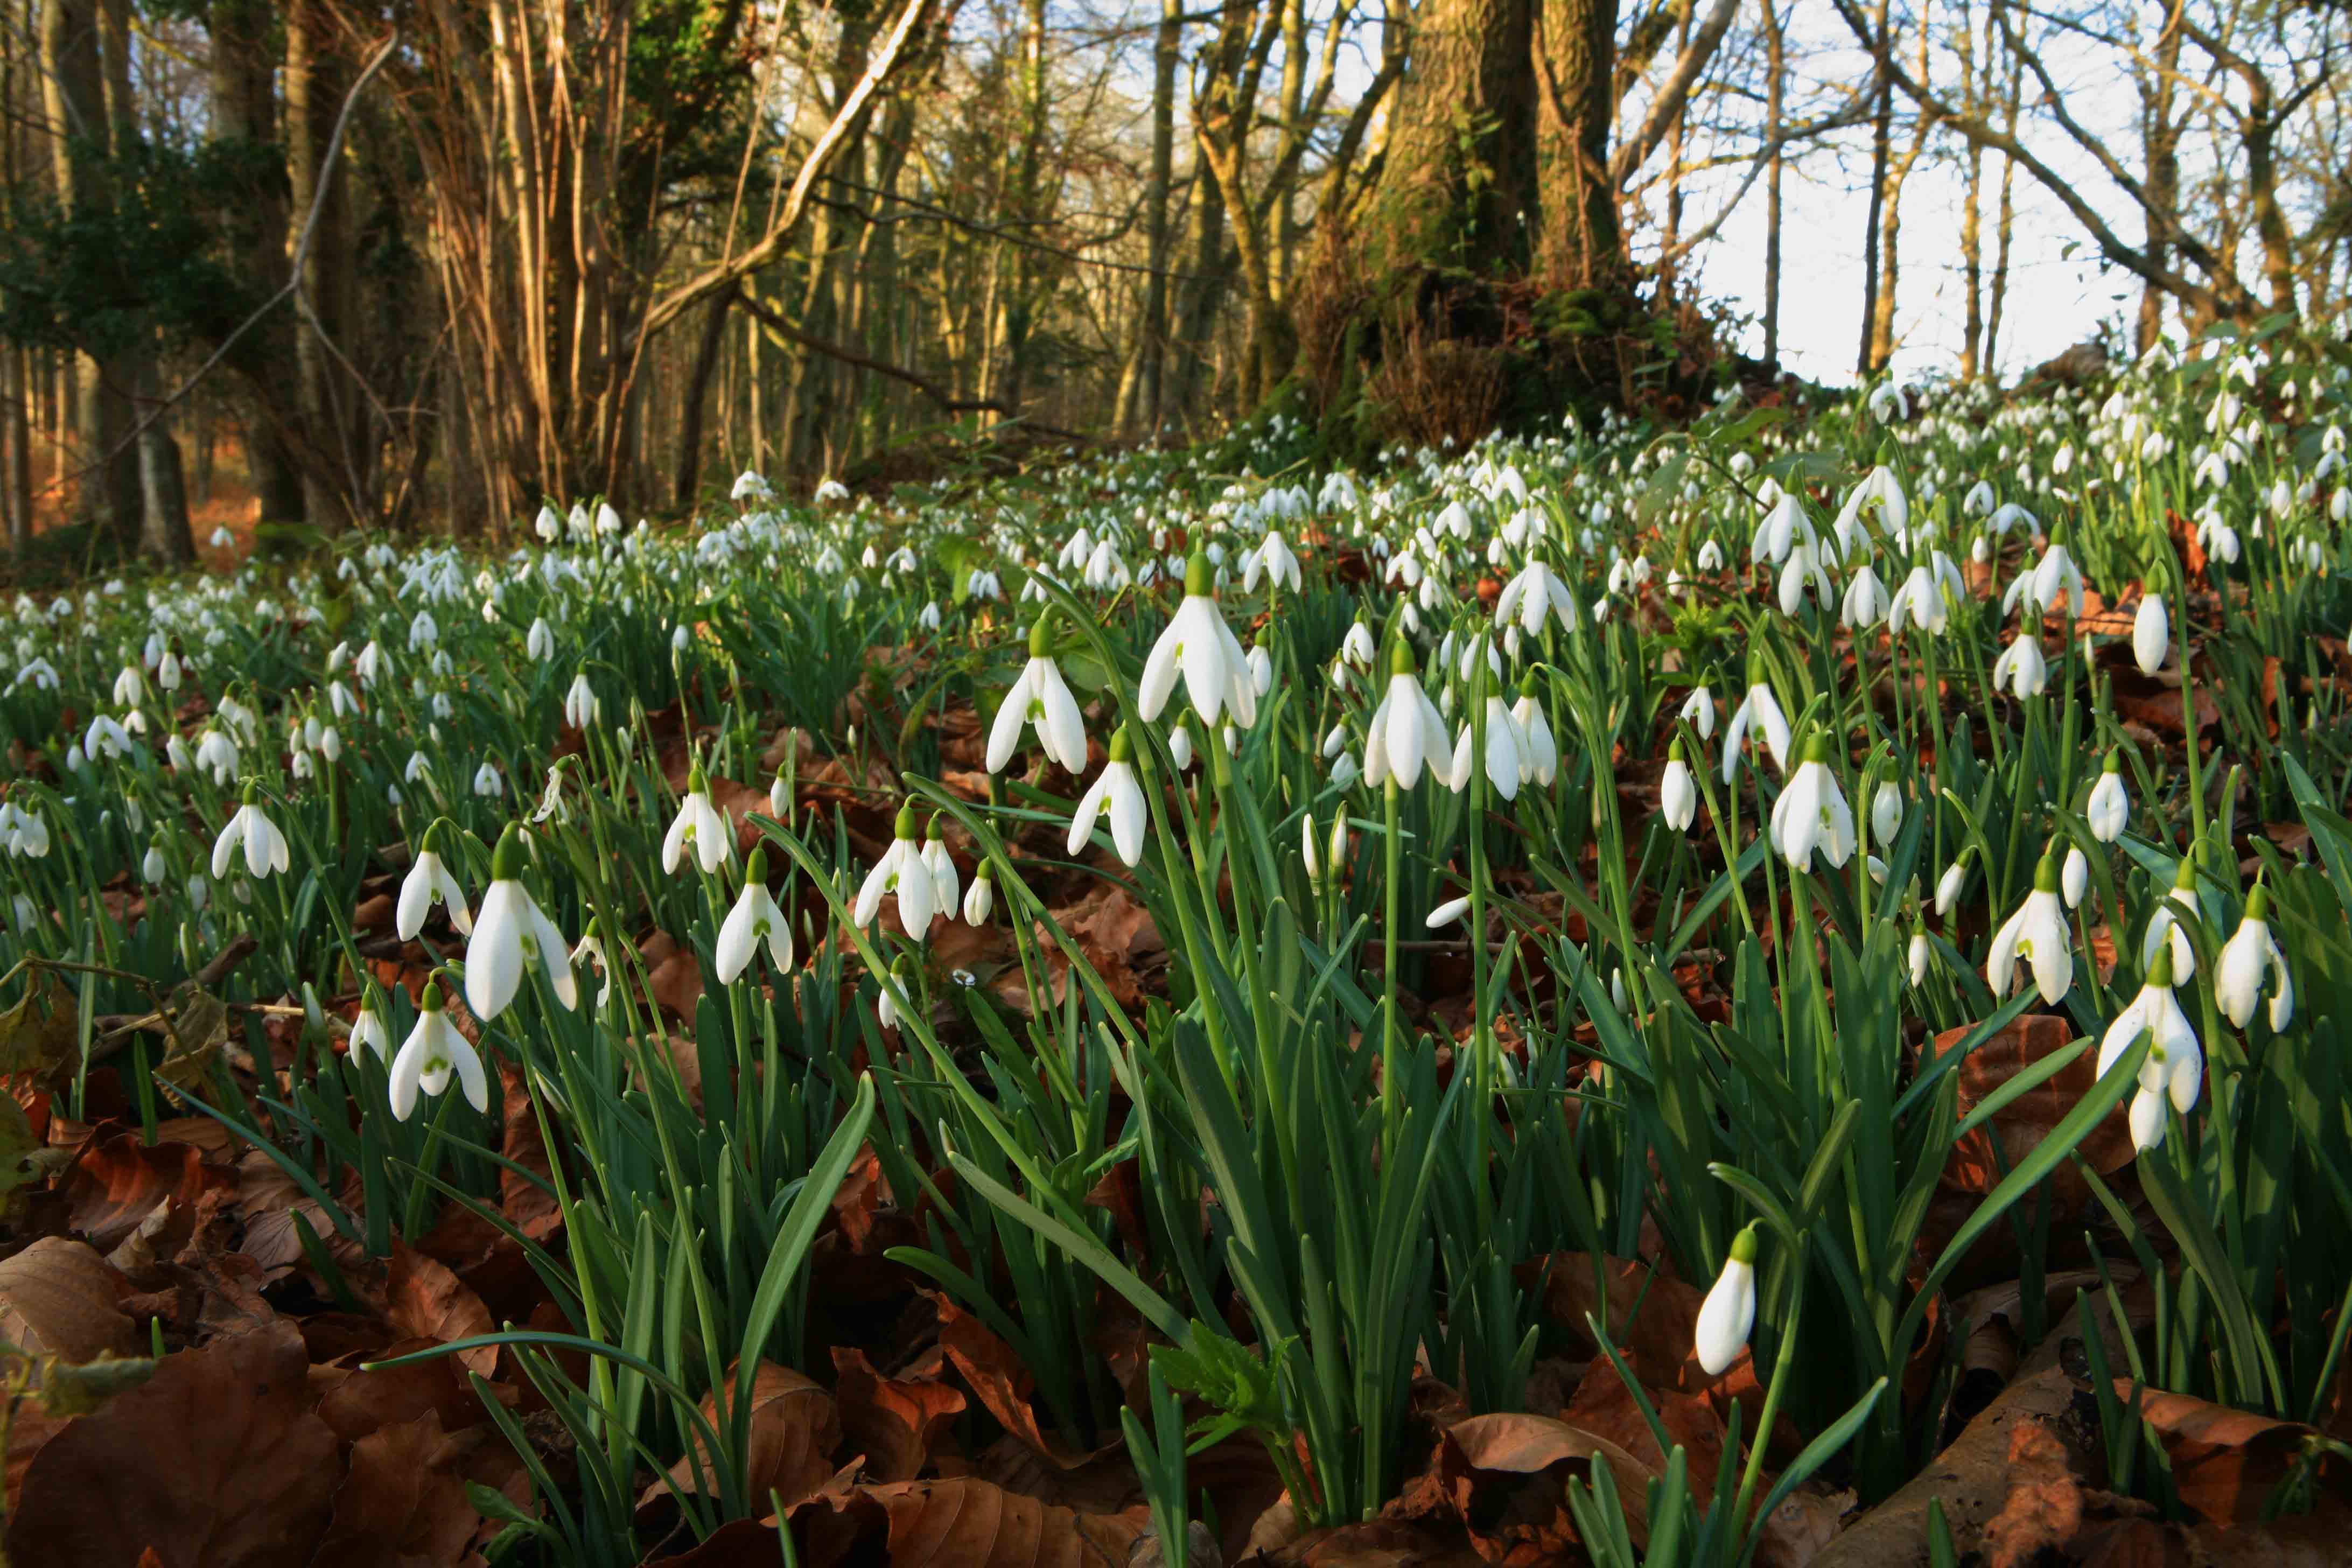 Snowdrop flowers in a forest